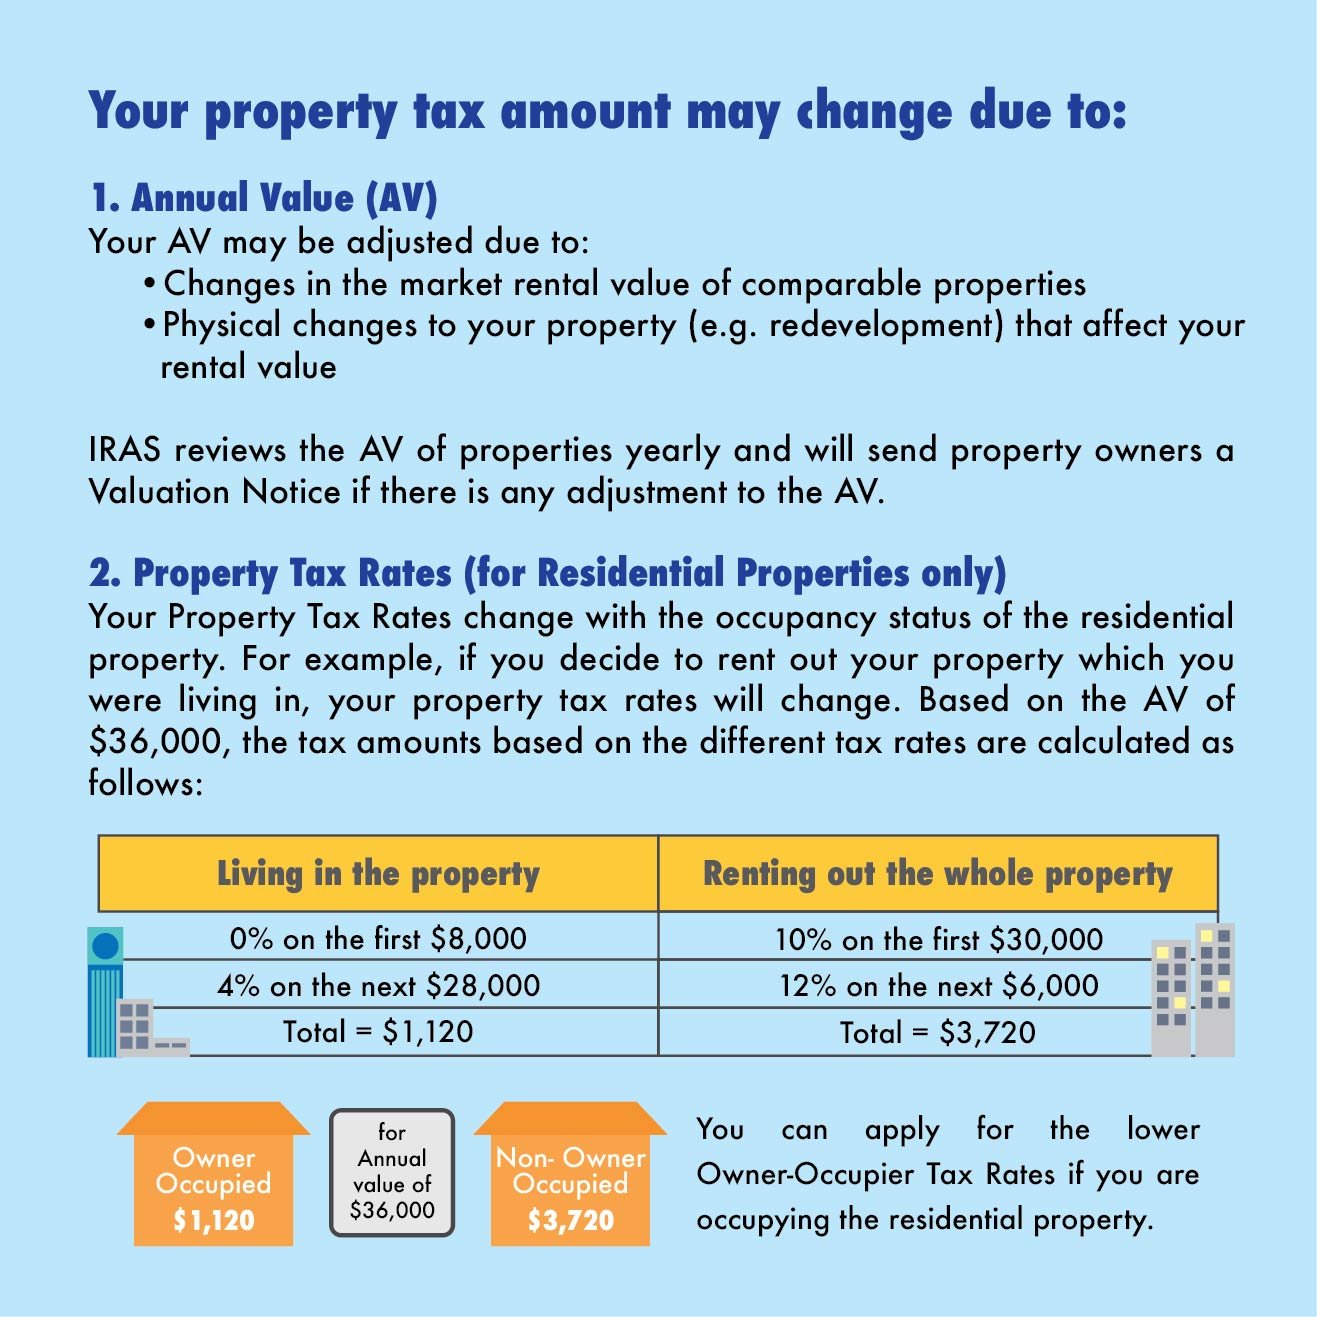 Your property tax amount may change due to changes in the Annual Value (AV) or Property Tax Rates (for residential properties only).